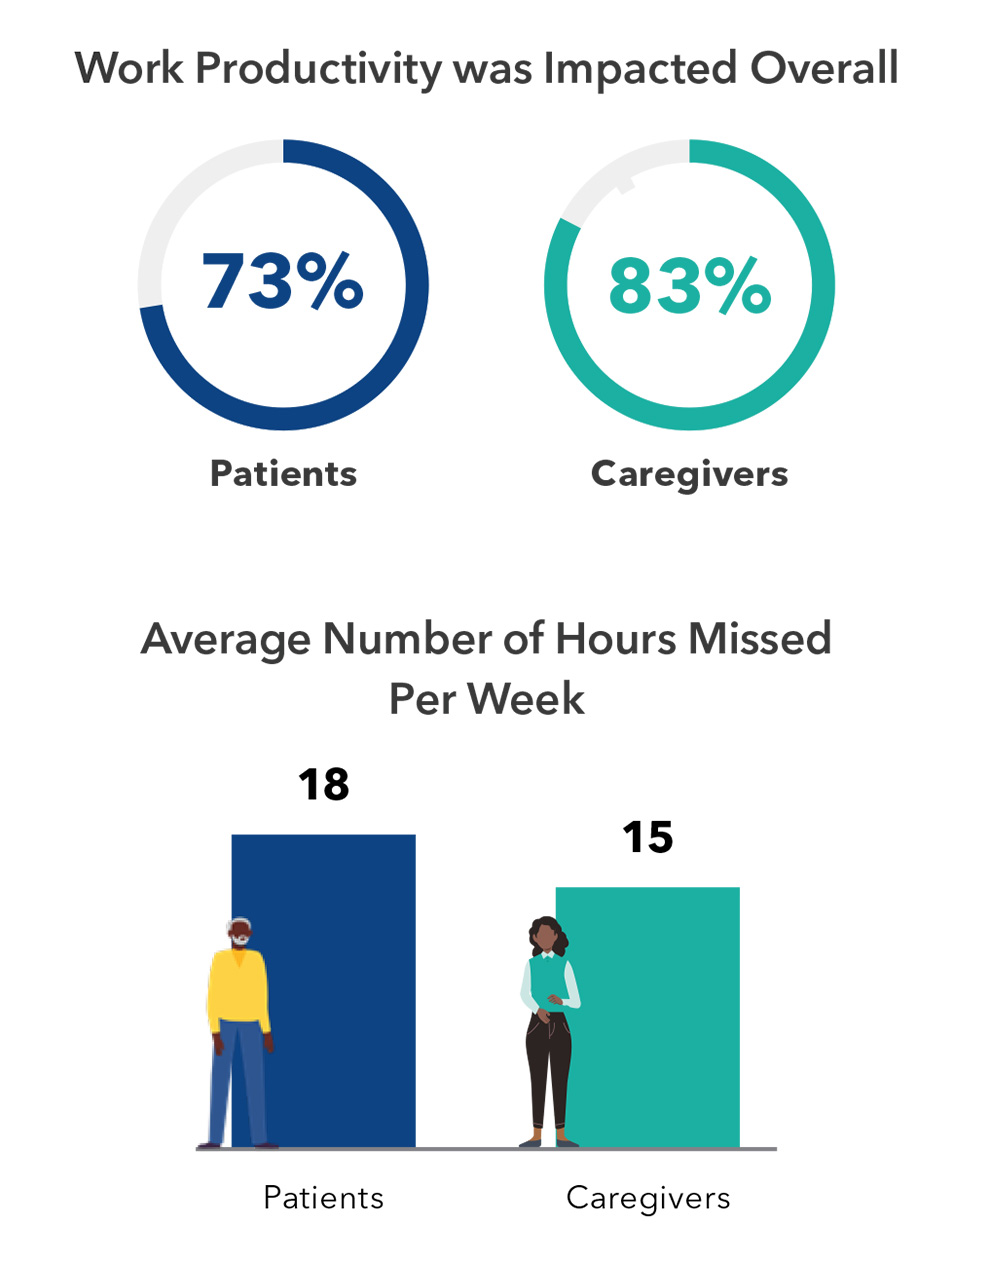 Graphic: Work Productivity was impacted overall. 73% of patients, 83% of caregivers.